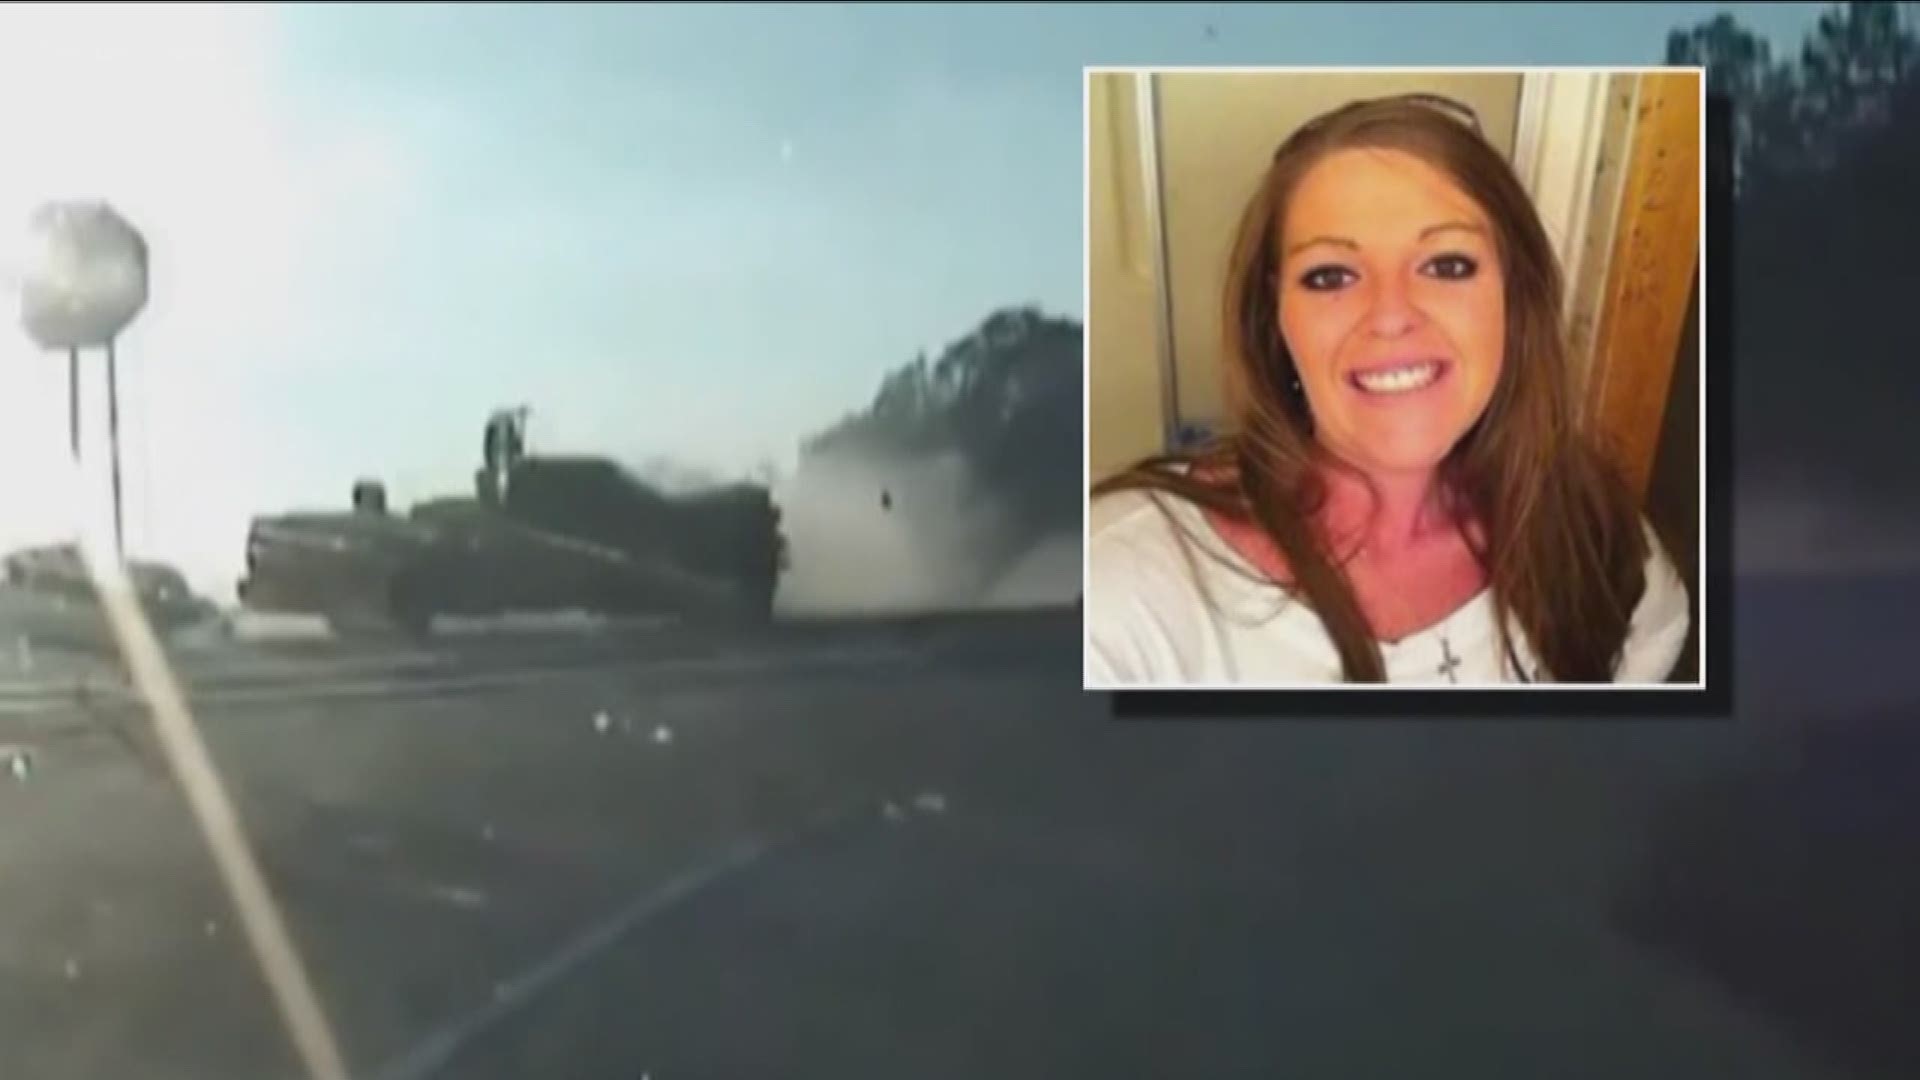 Kristin Dyer was killed in a high speed police crash caused by Joseph Starks, who was convicted of murdering her.